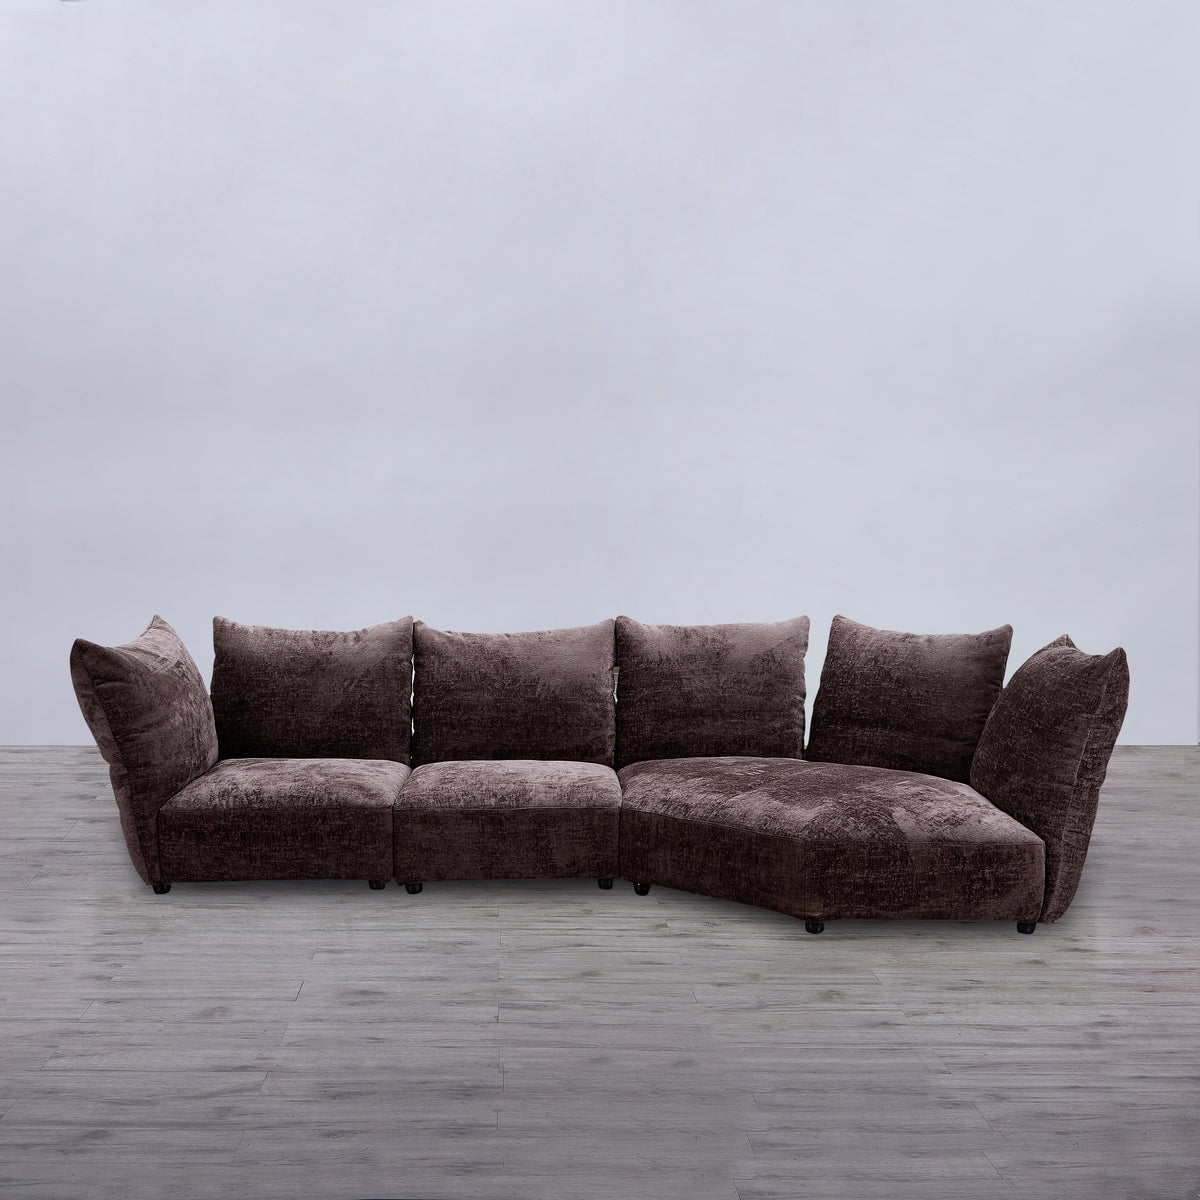 Modular Sofa with Moving Backrest - Brown